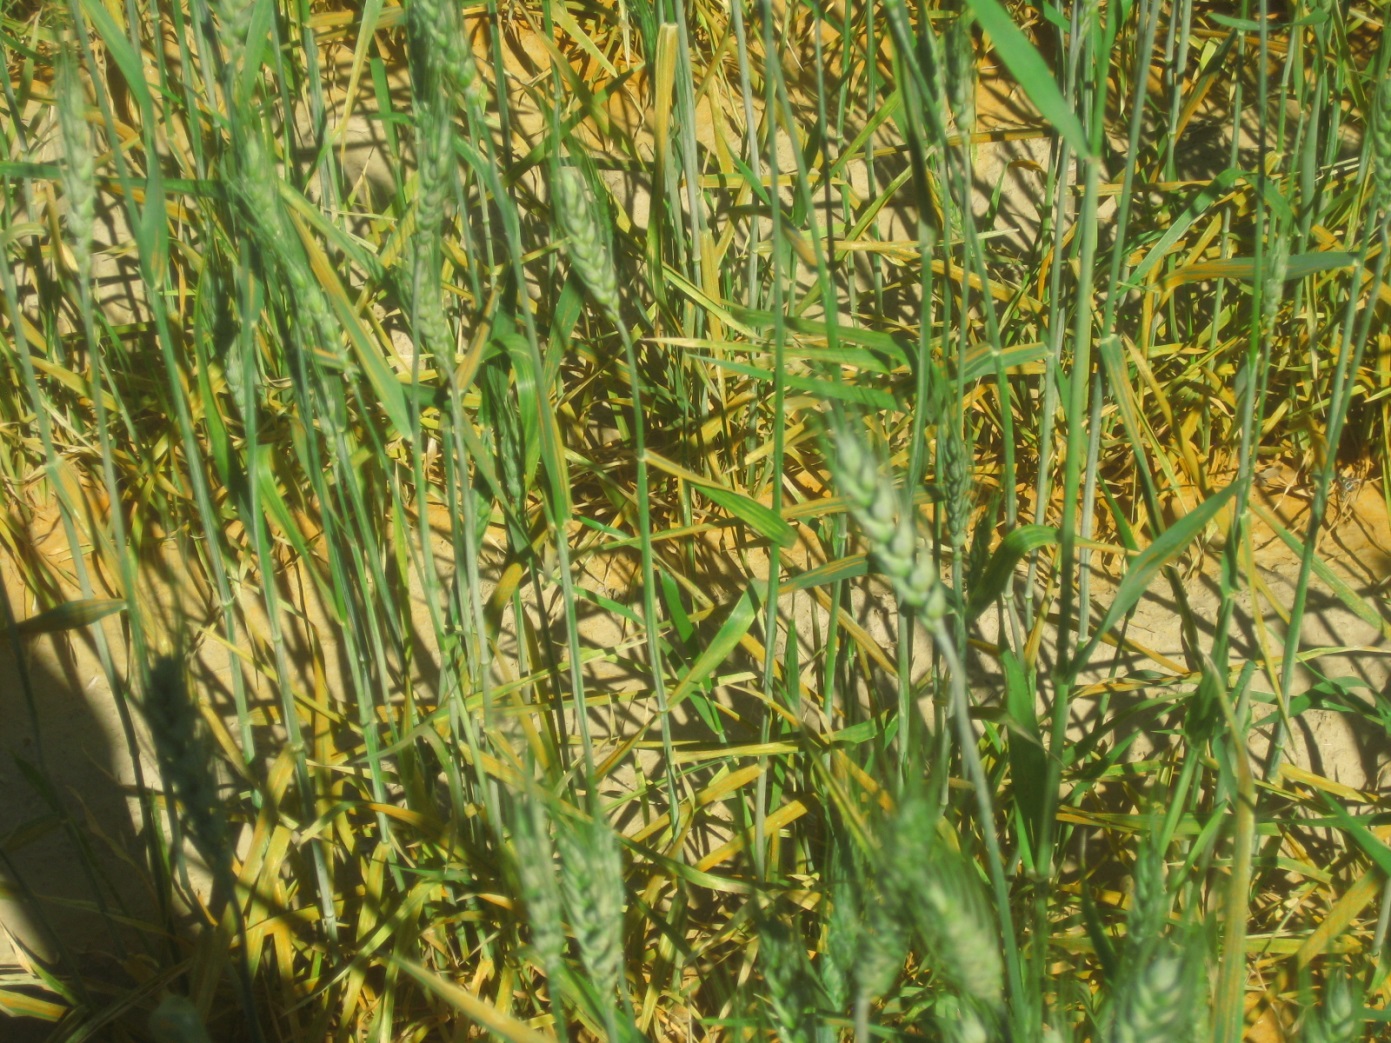 Stripe rust of natural infection